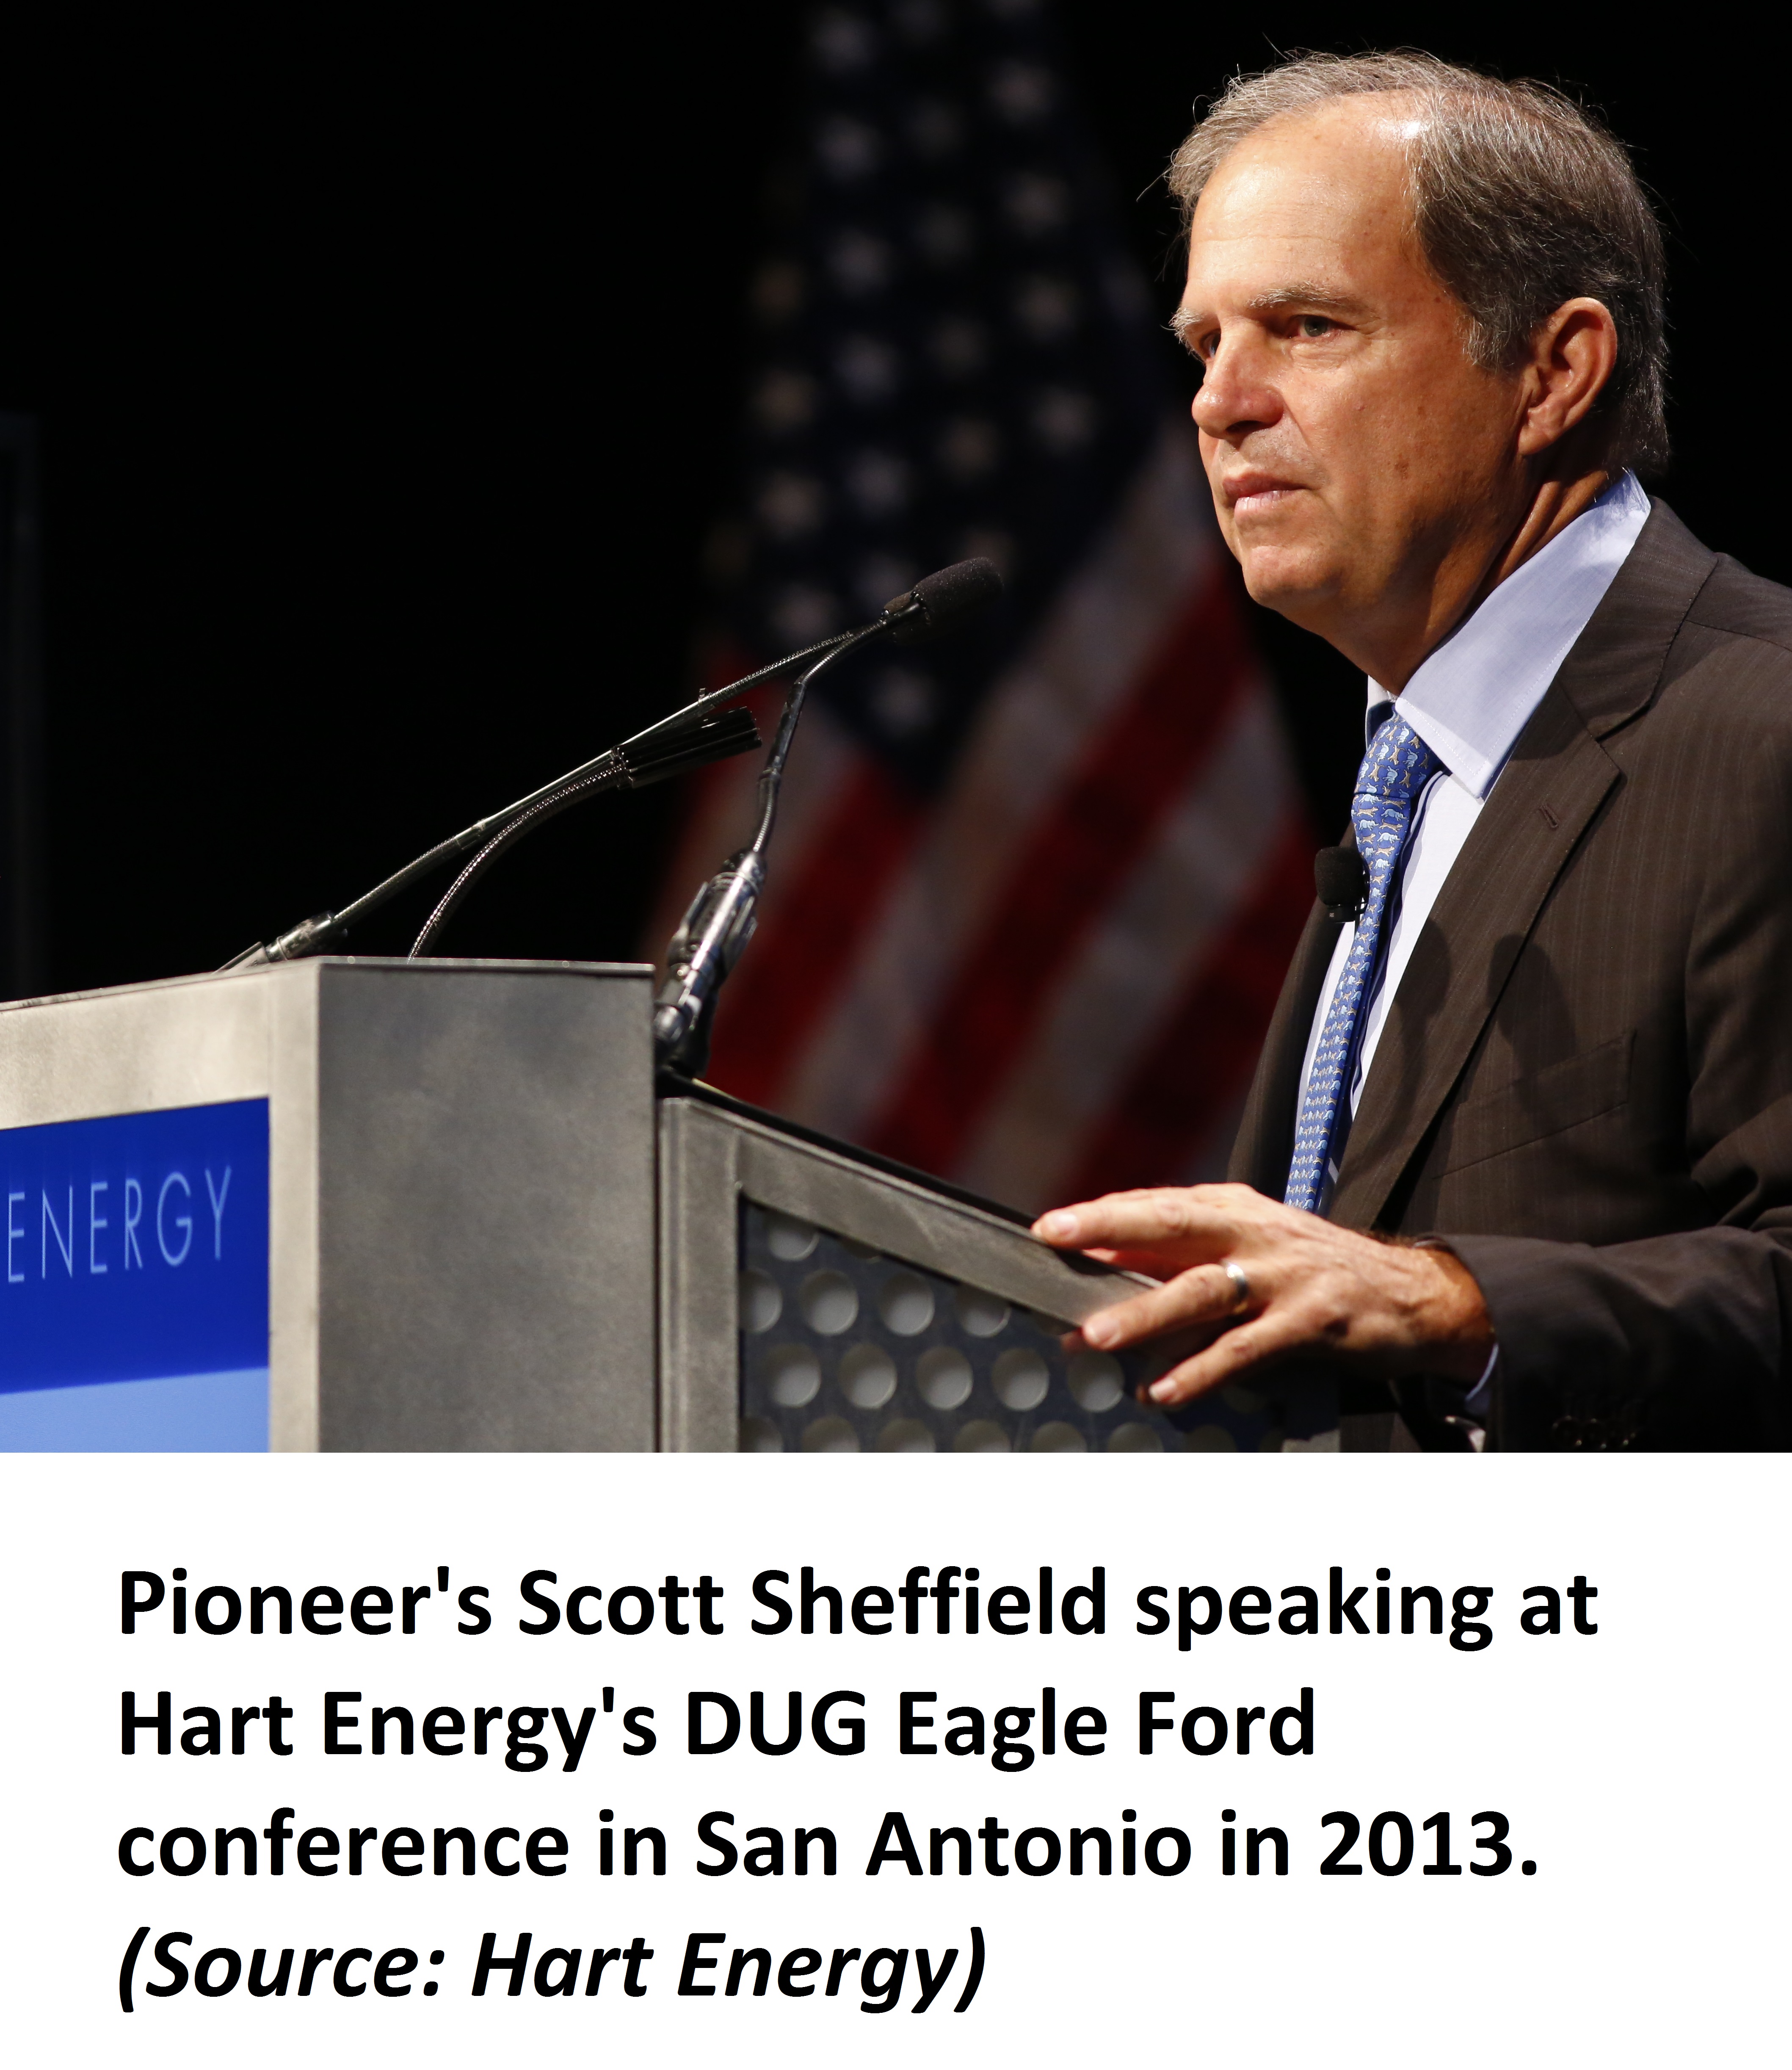 Pioneer's Scott Sheffield speaking at Hart Energy's DUG Eagle Ford conference in San Antonia in 2013.